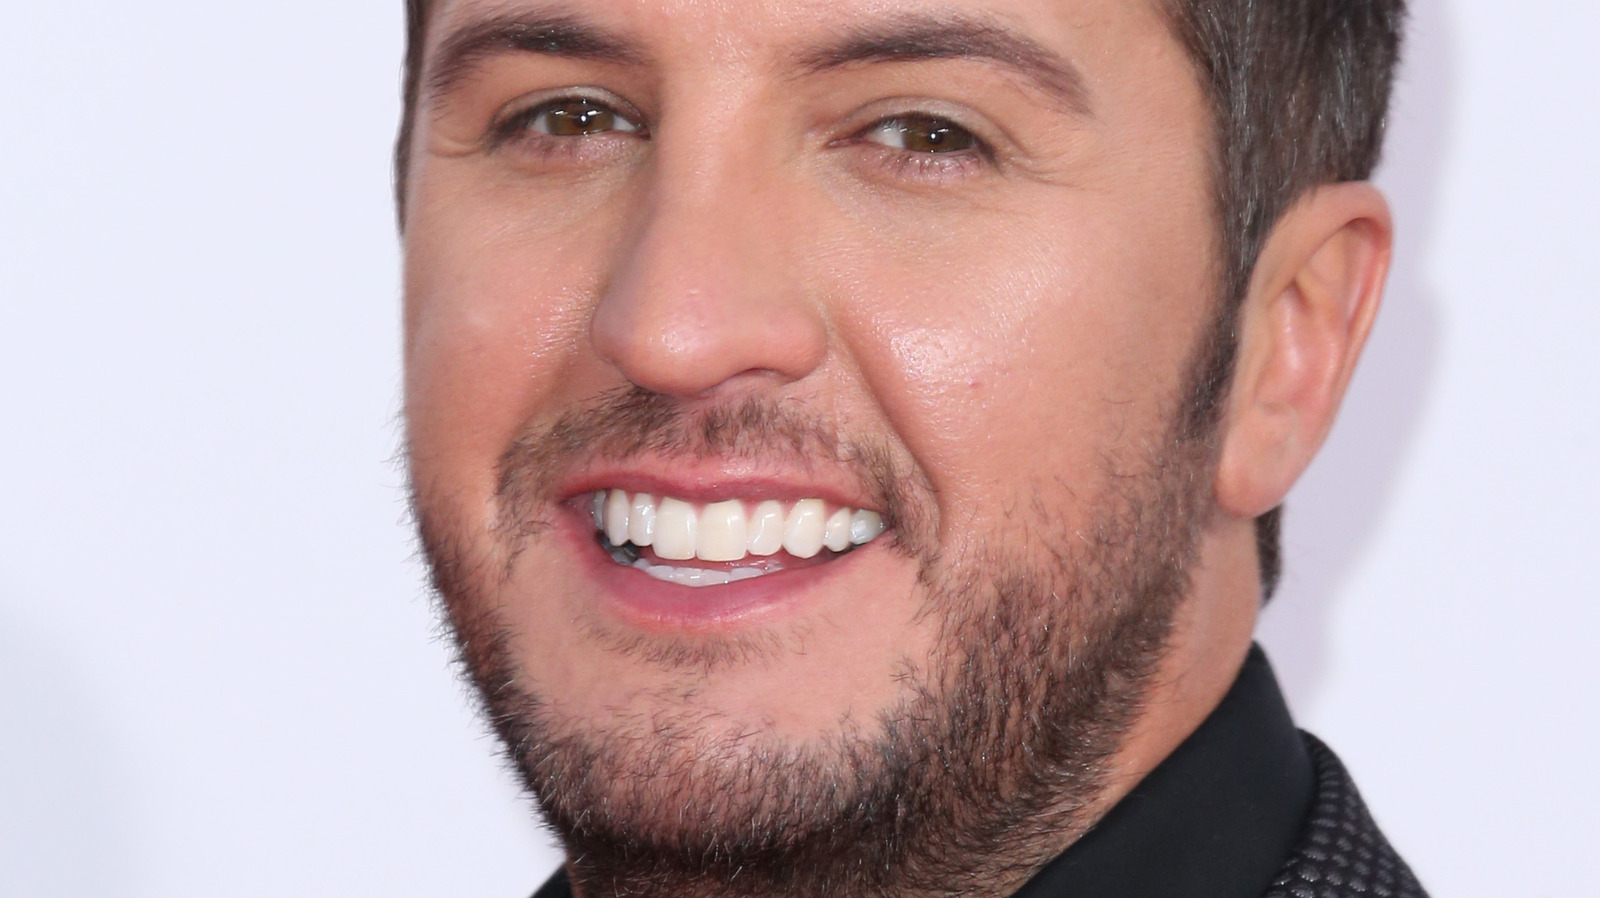 How Luke Bryan Is Really Doing After Being Diagnosed With COVID-19